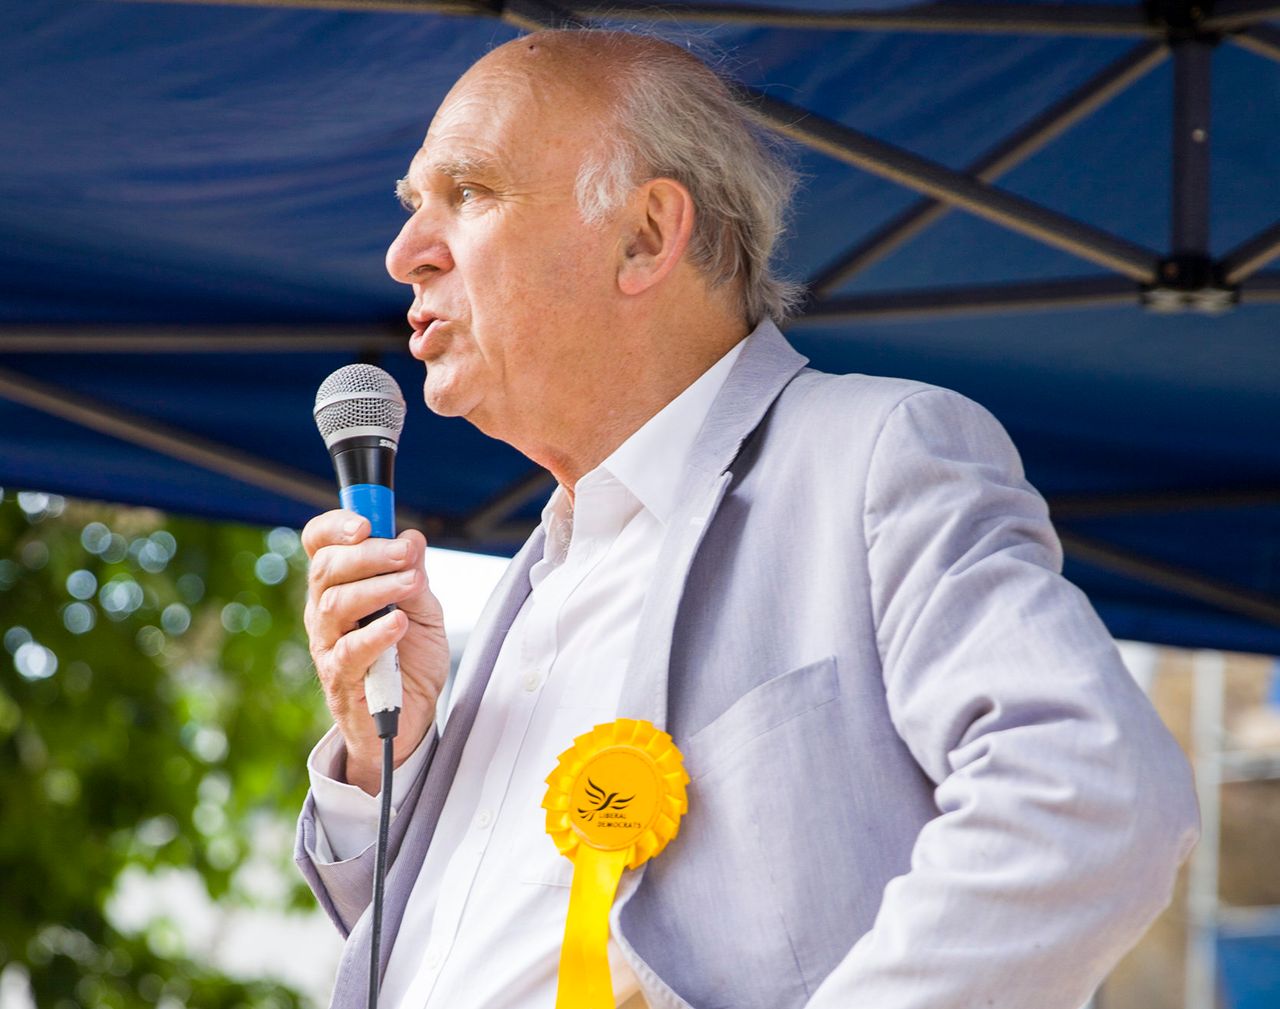 Vince Cable speaks at a garden party in Twickenham to raise money for the Shooting StarChase charity on Sunday.